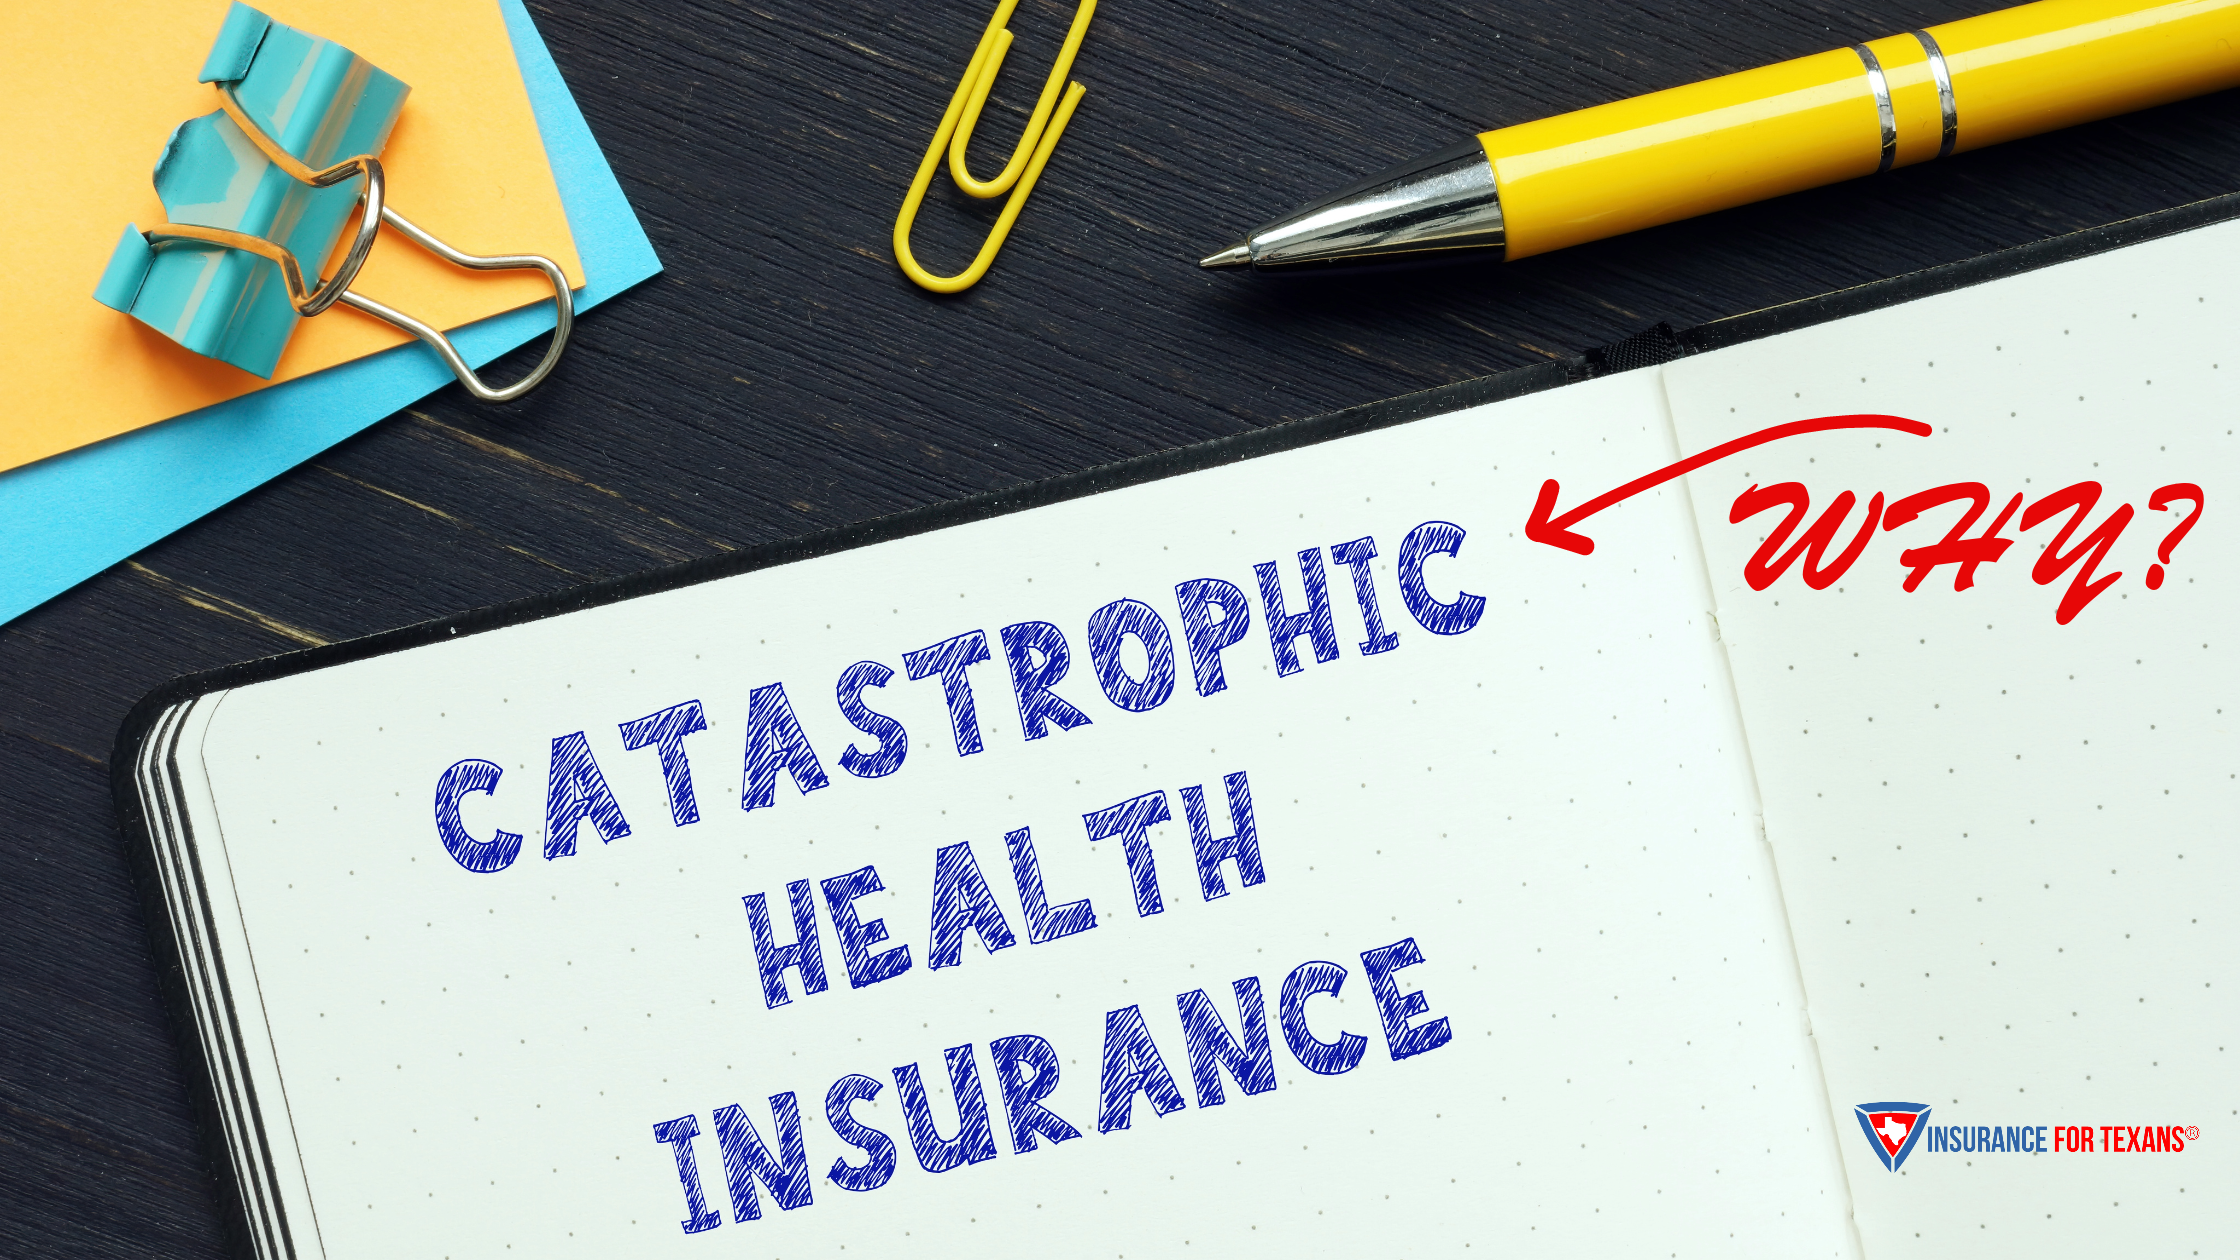 Why Would Texans Choose Catastrophic Health Insurance Over Other Options?